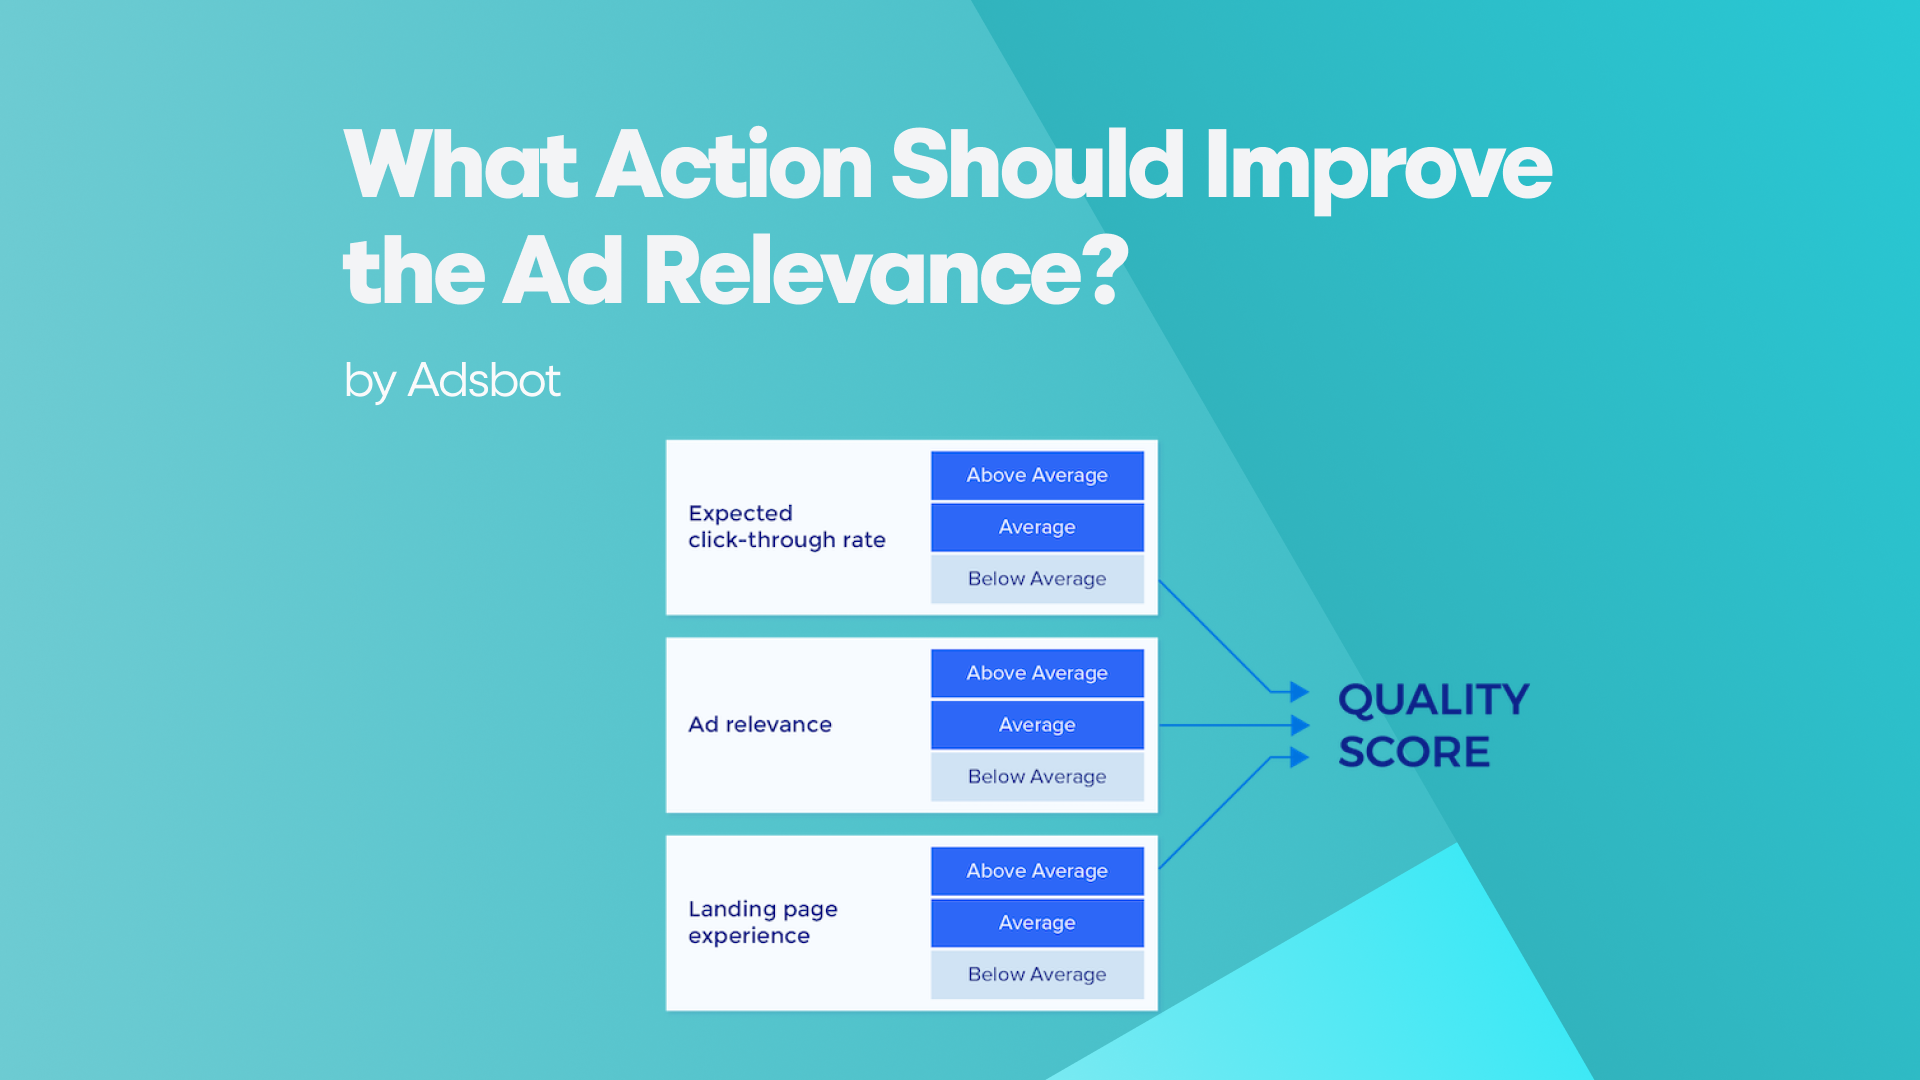 What Action Should Improve Ad Relevance?